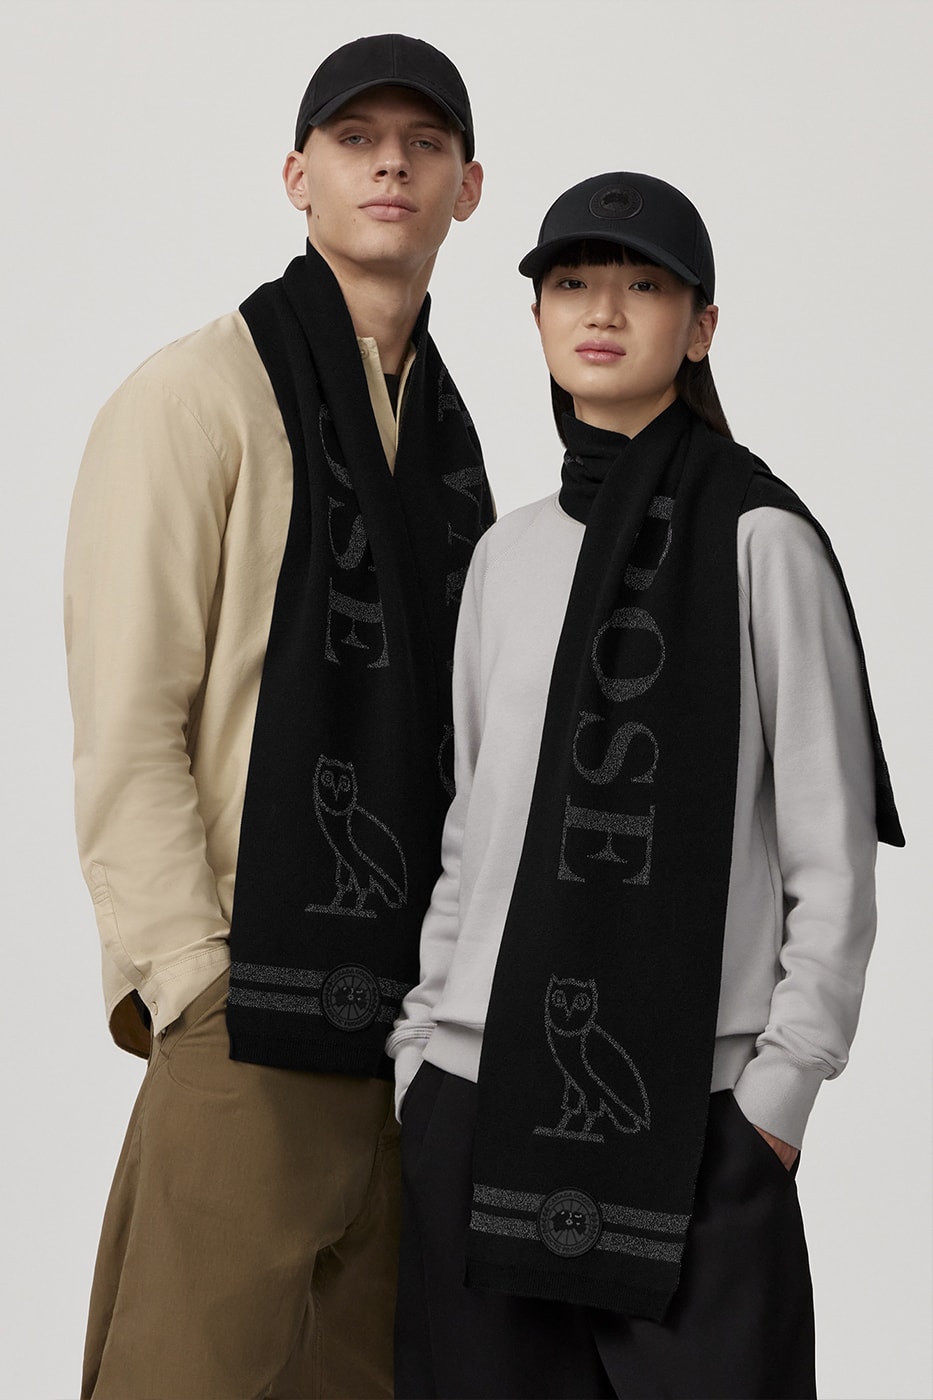 Canada Goose x OVO Celebrate 12 Years of Partnership With "Life at Night" Capsule release info drake toronto canadian brand octobers very own balaclava scarf chillwakc bomber 